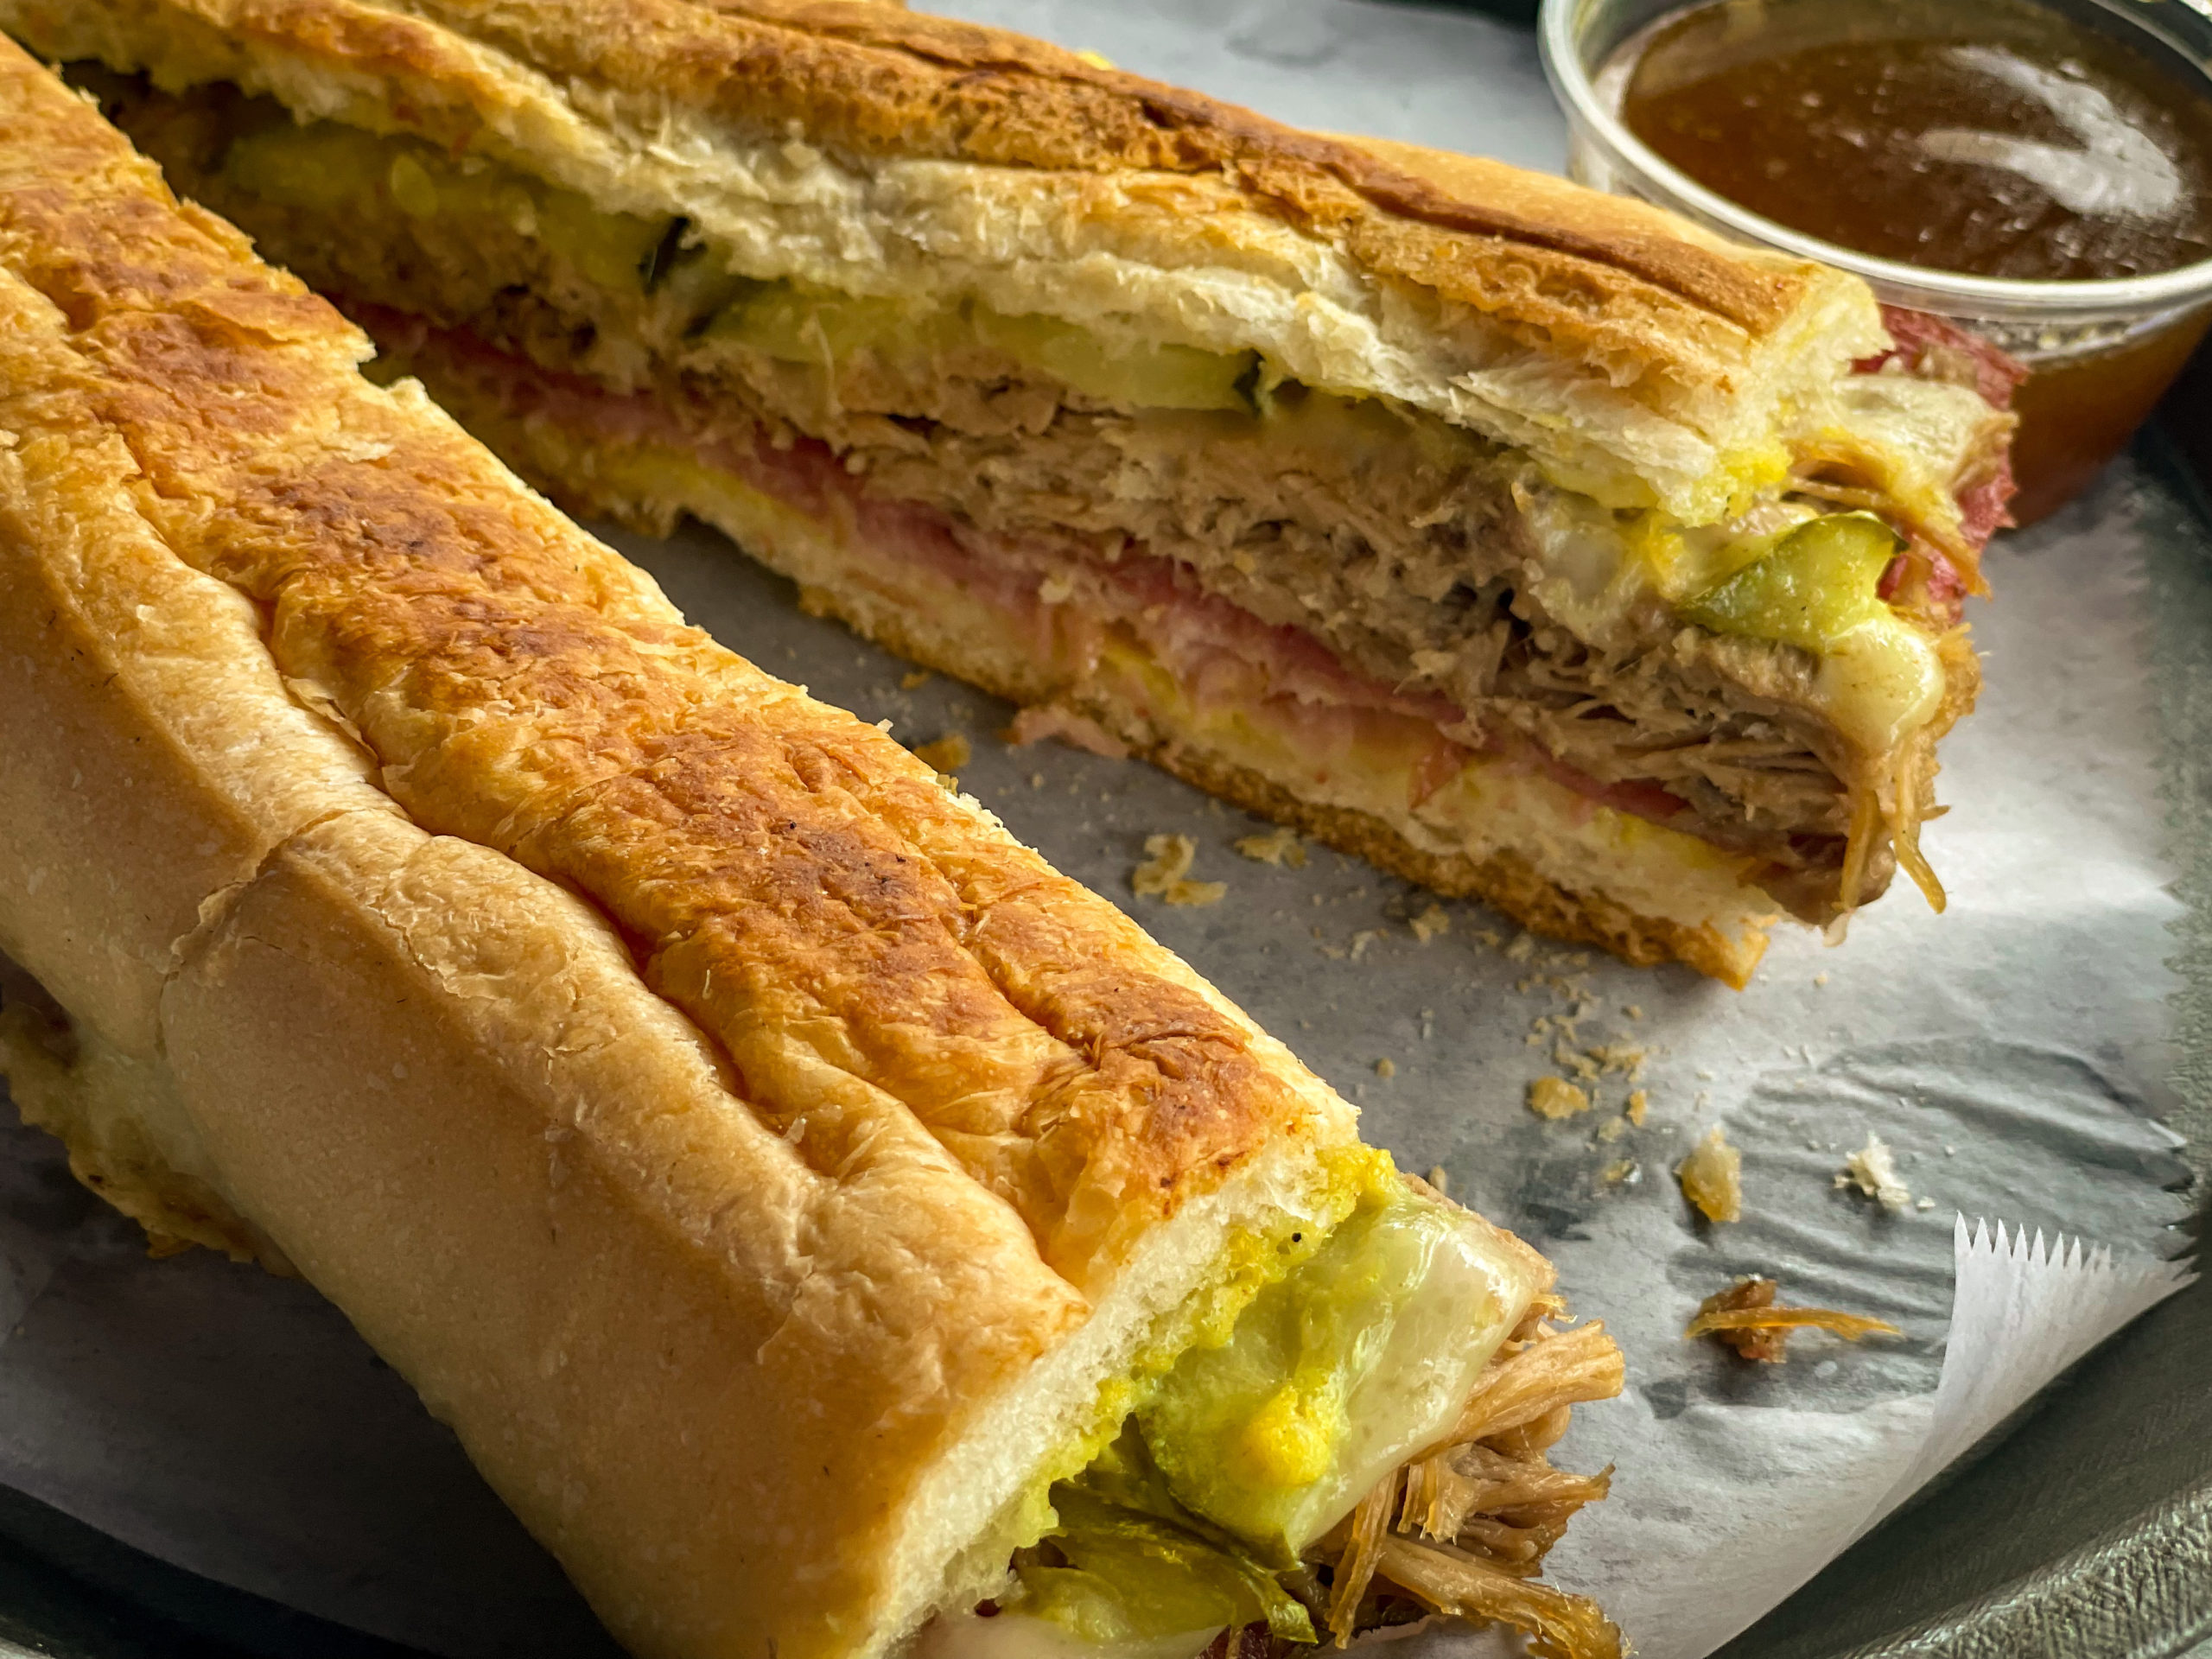 A Cuban sandwich prepared for lunch at The Stone Soup Company in Ybor City.